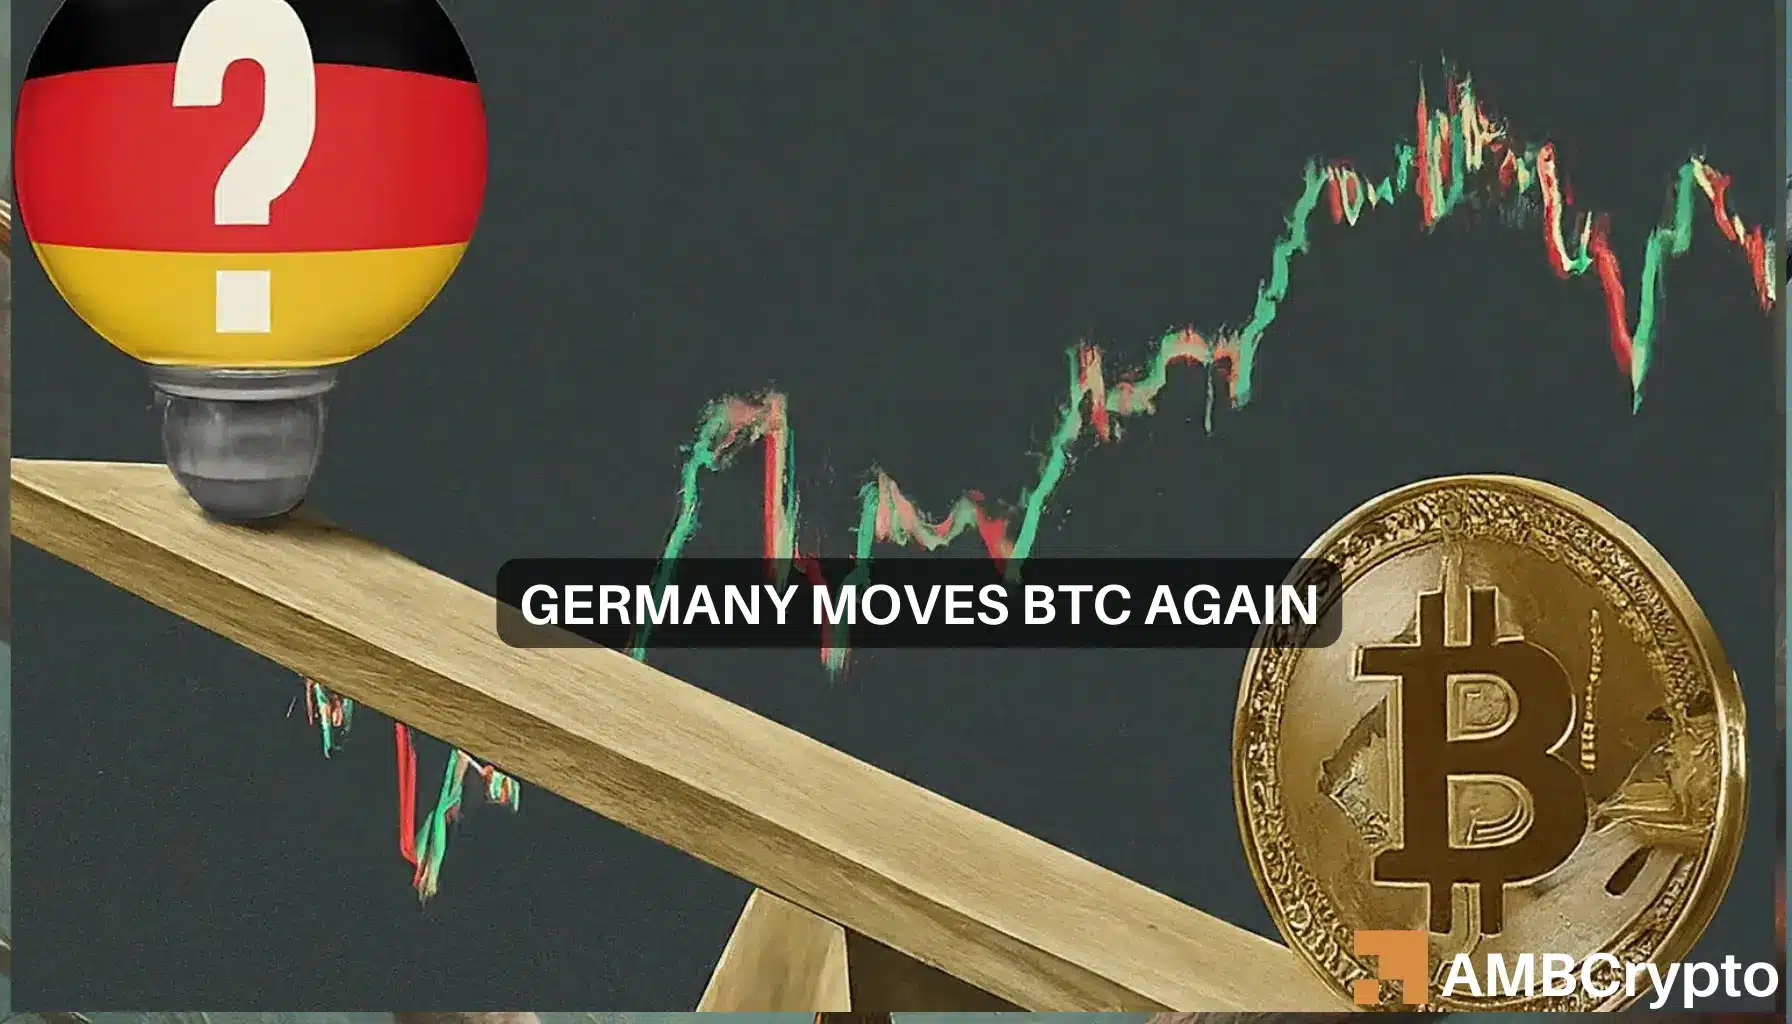 Bitcoin decouples from stocks: Was Germany’s BTC sale the trigger?